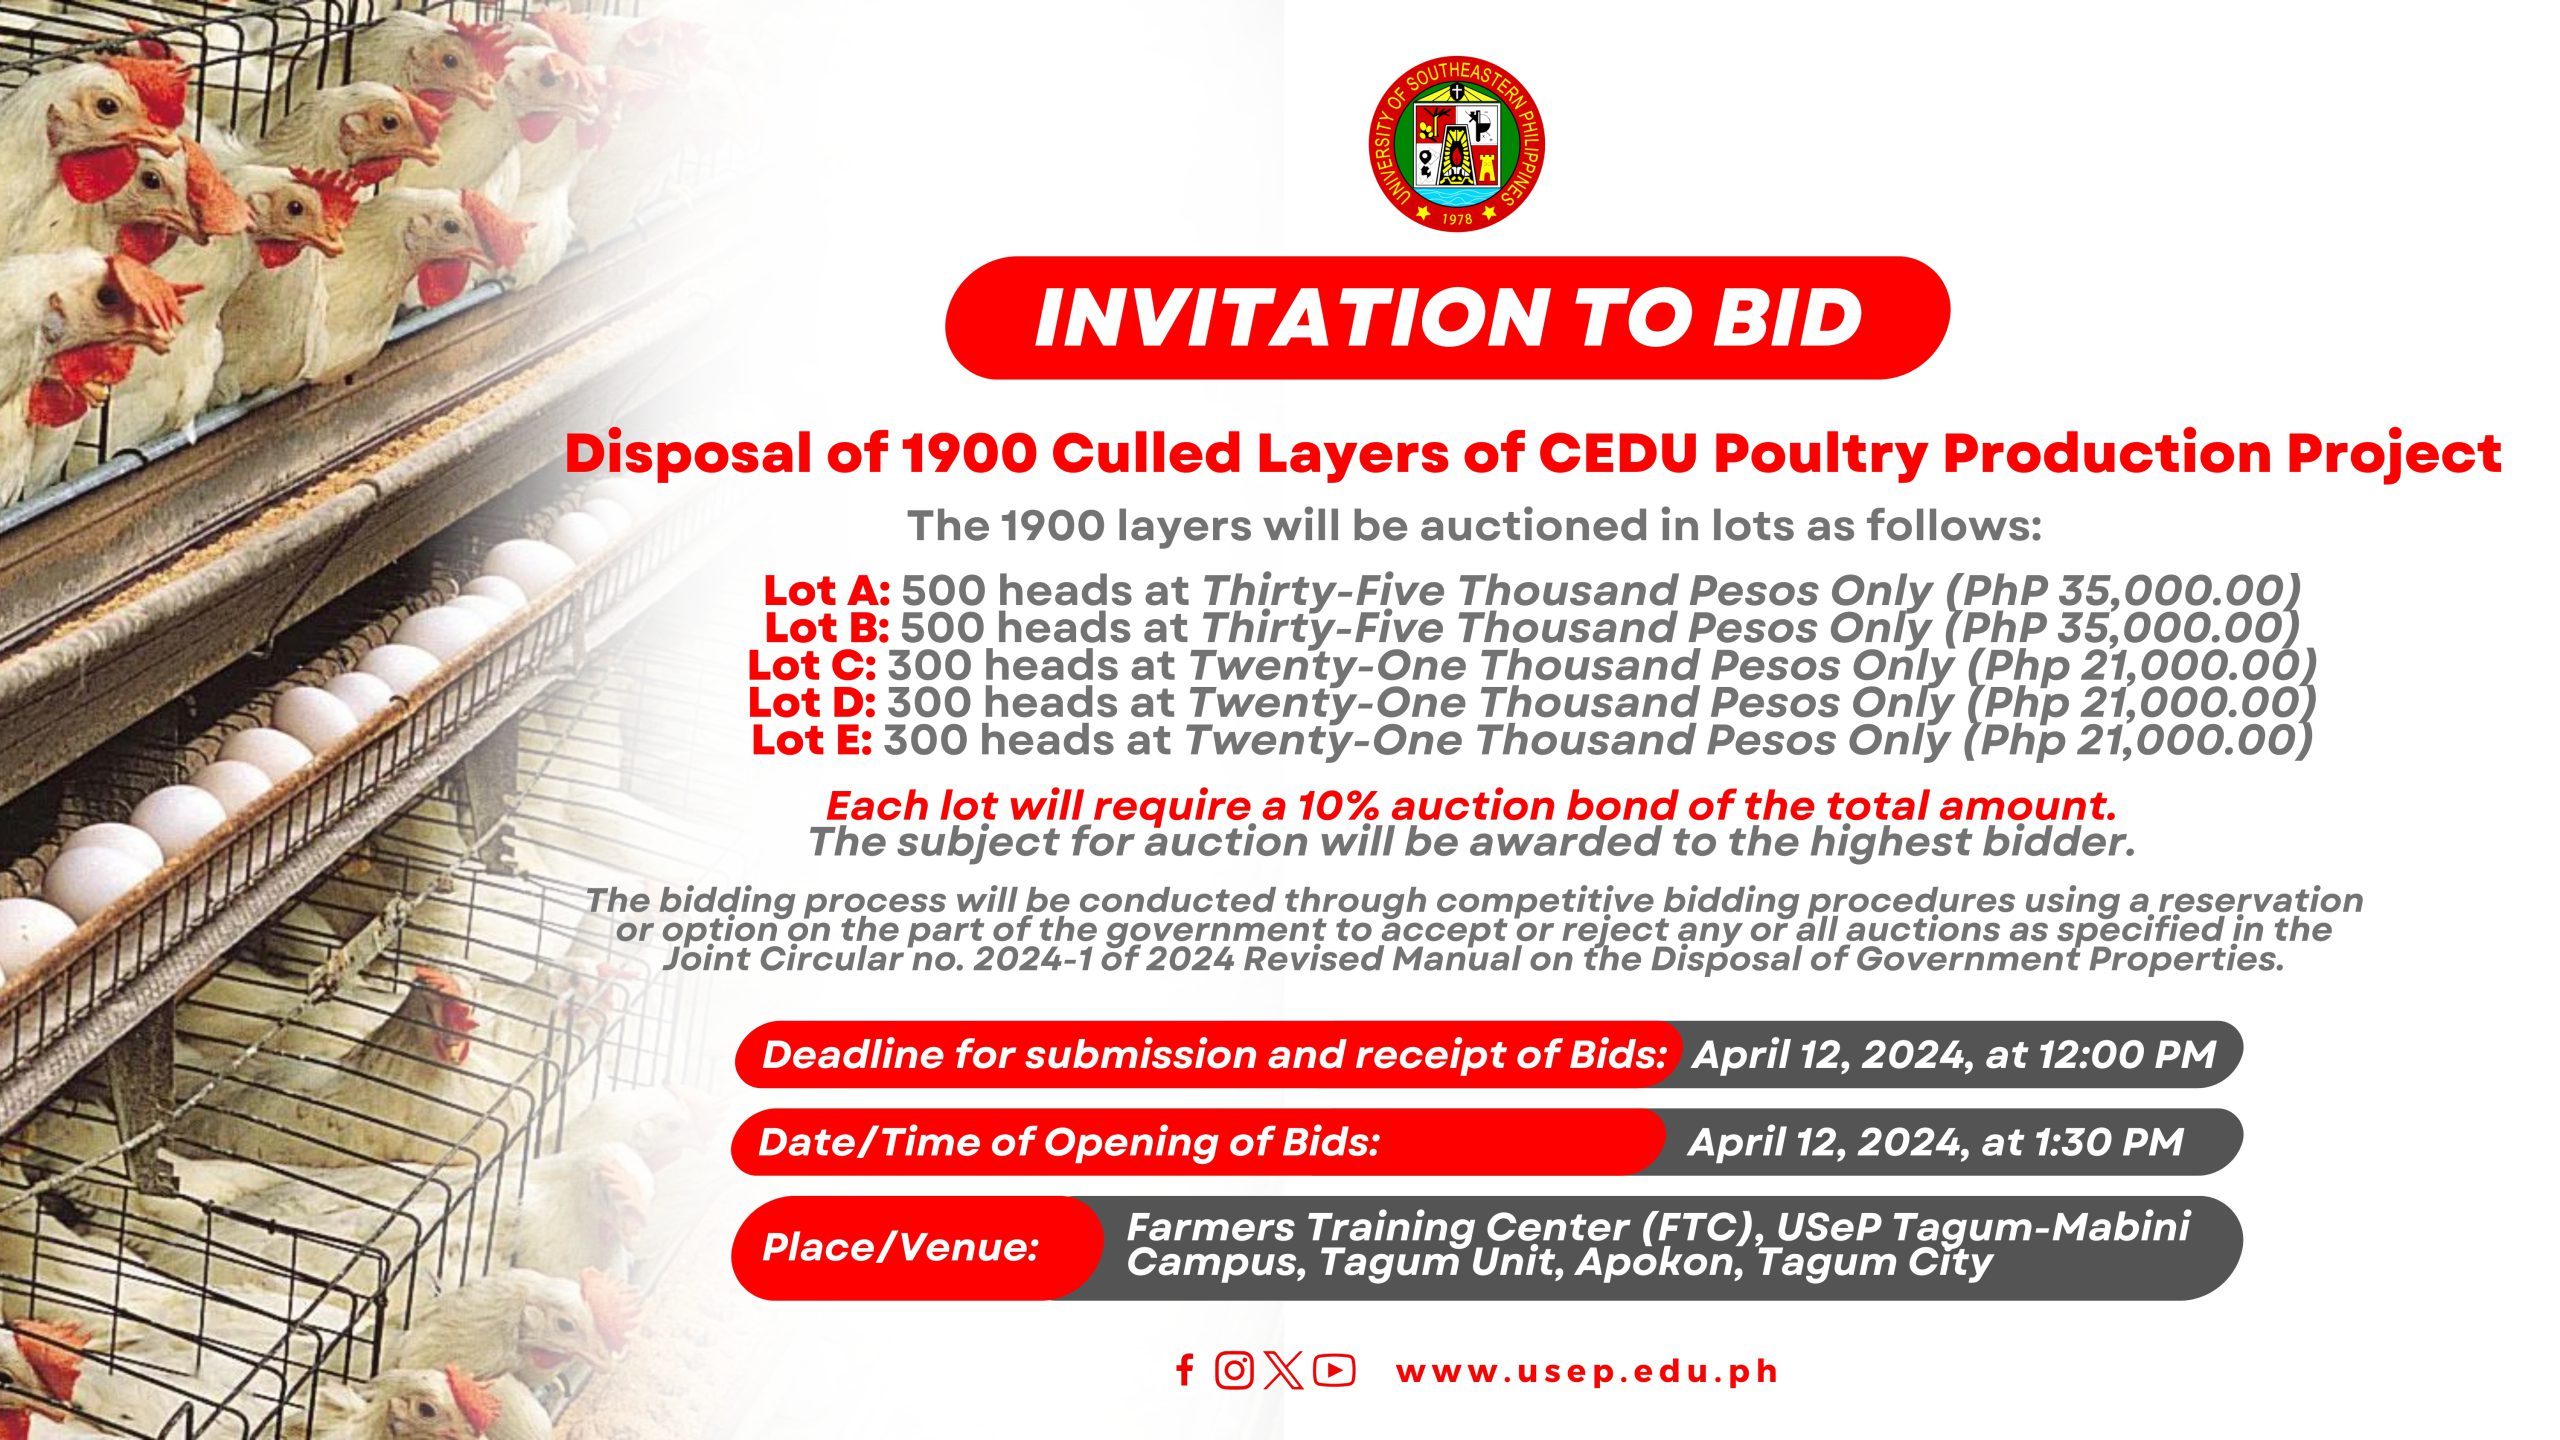 [INVITATION TO BID] Disposal of Culled Layers of CEDU Poultry Production Project